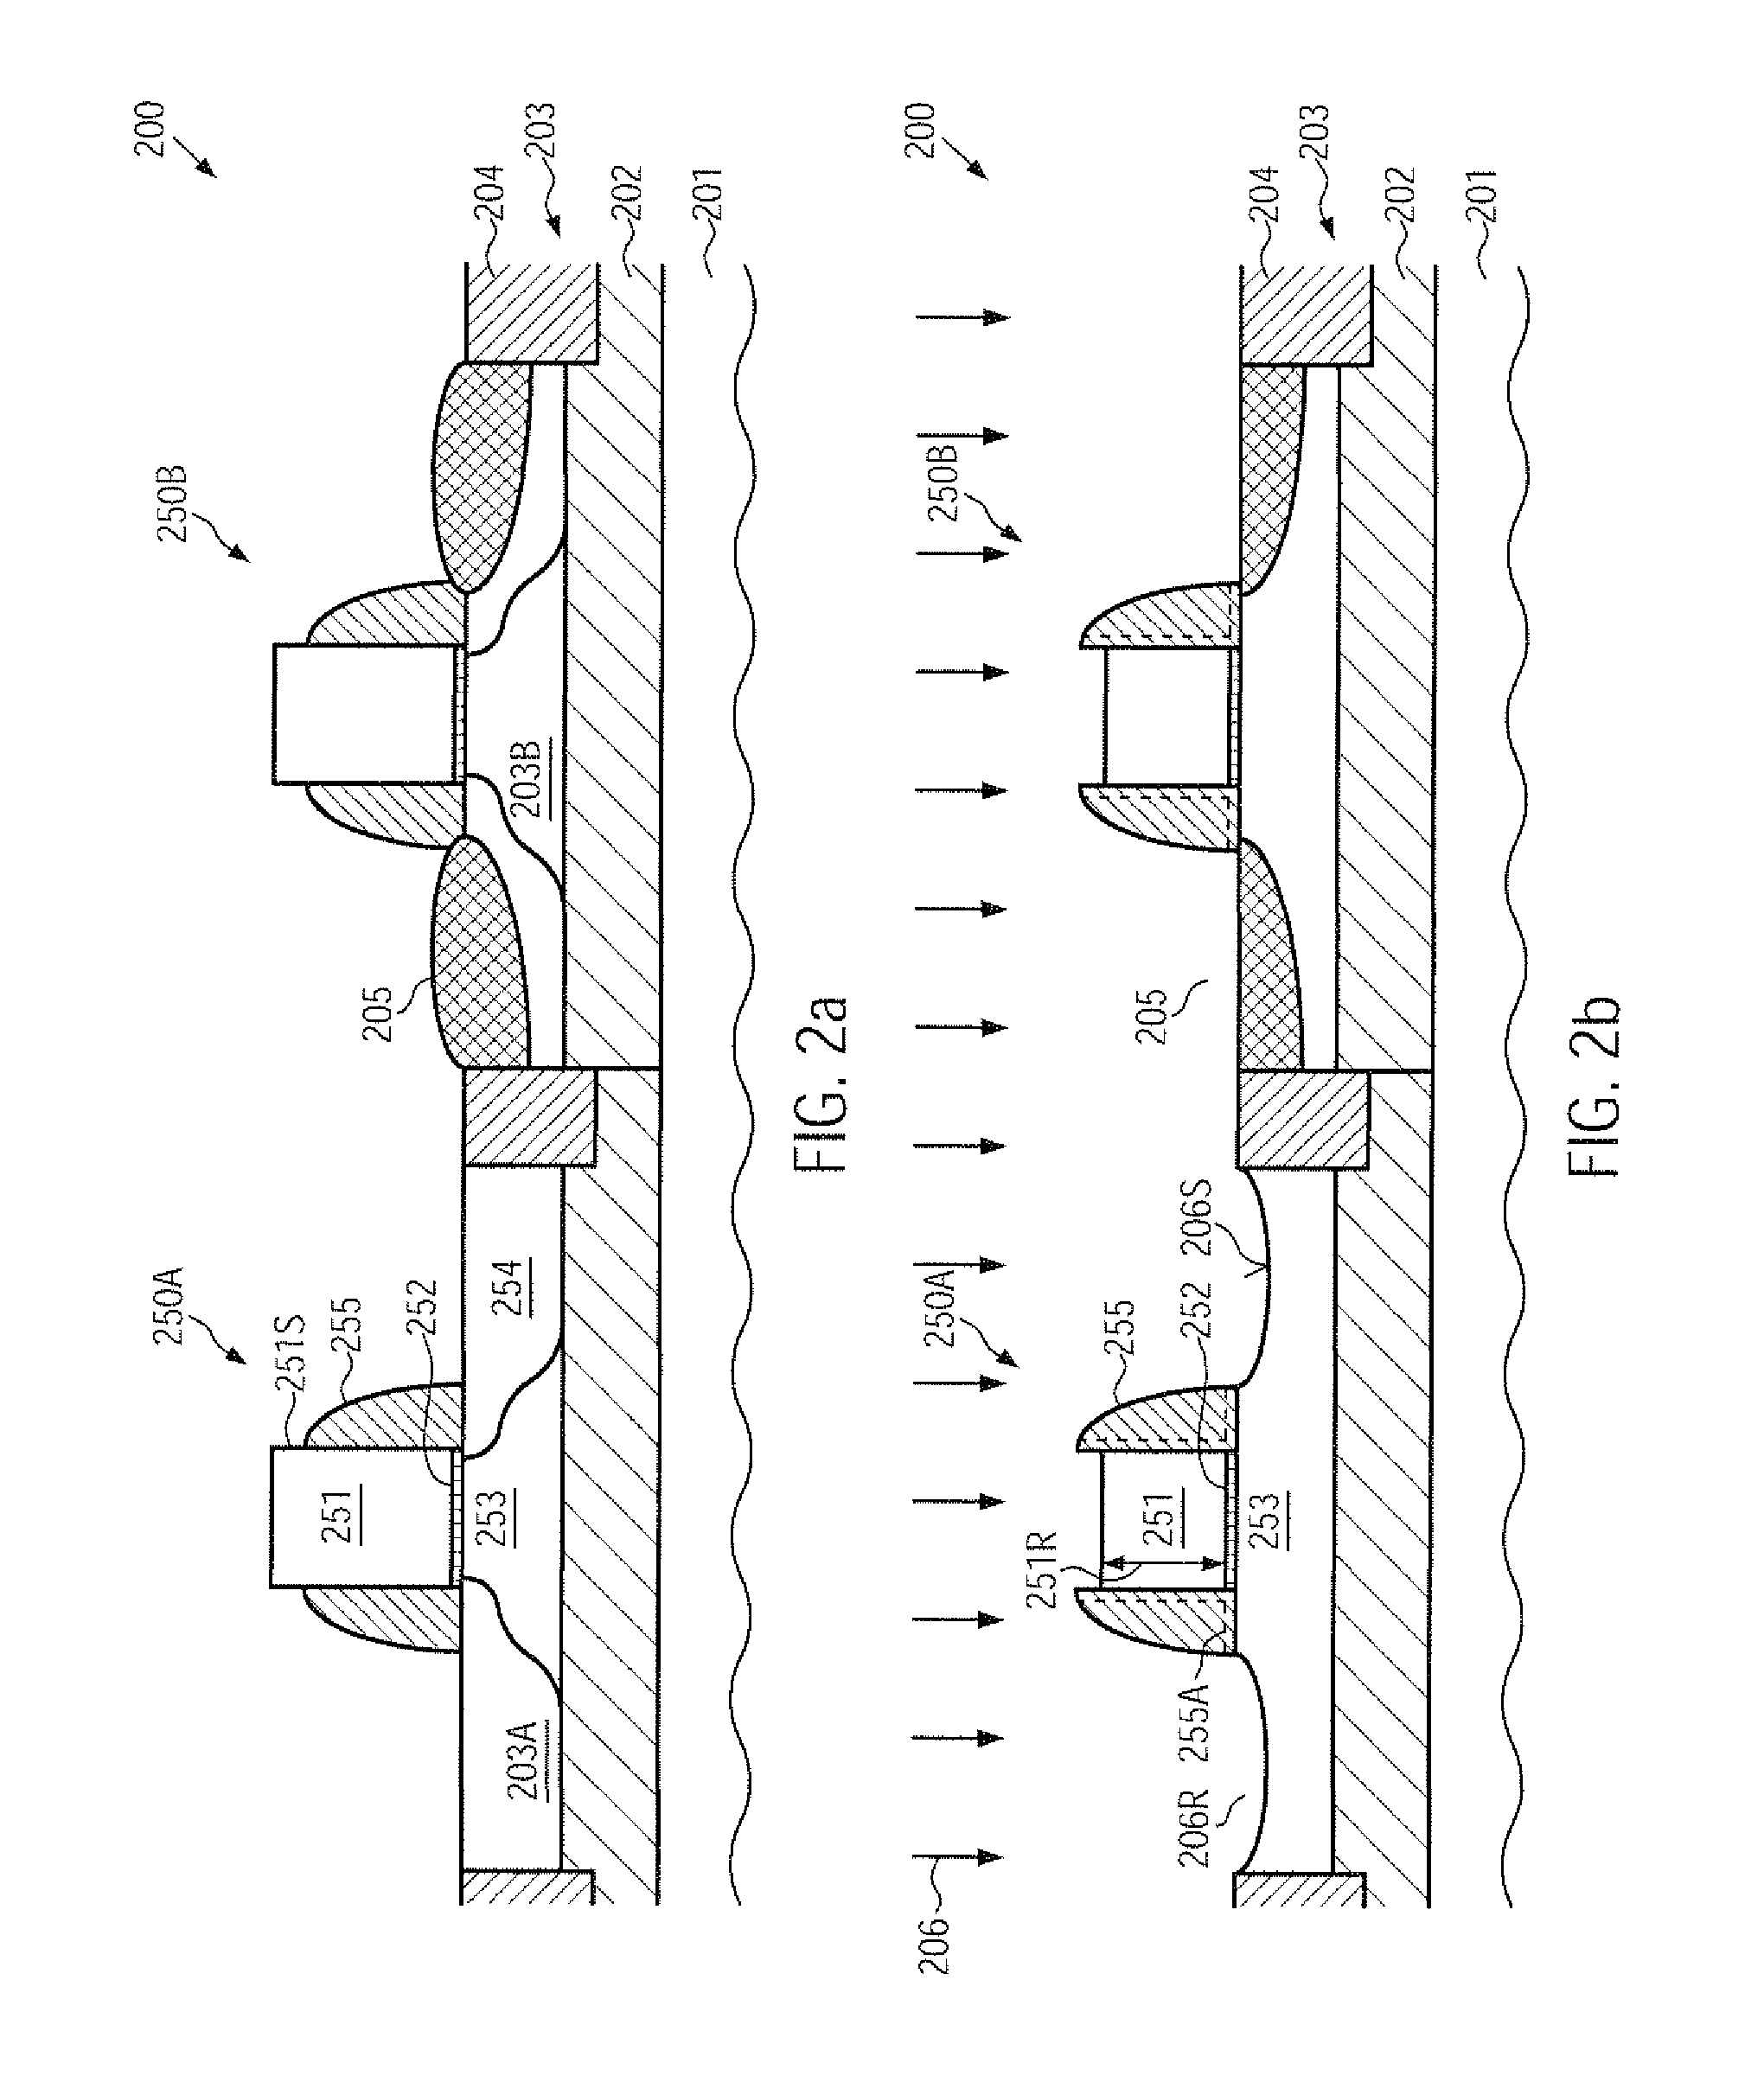 Recessed drain and source areas in combination with advanced silicide formation in transistors